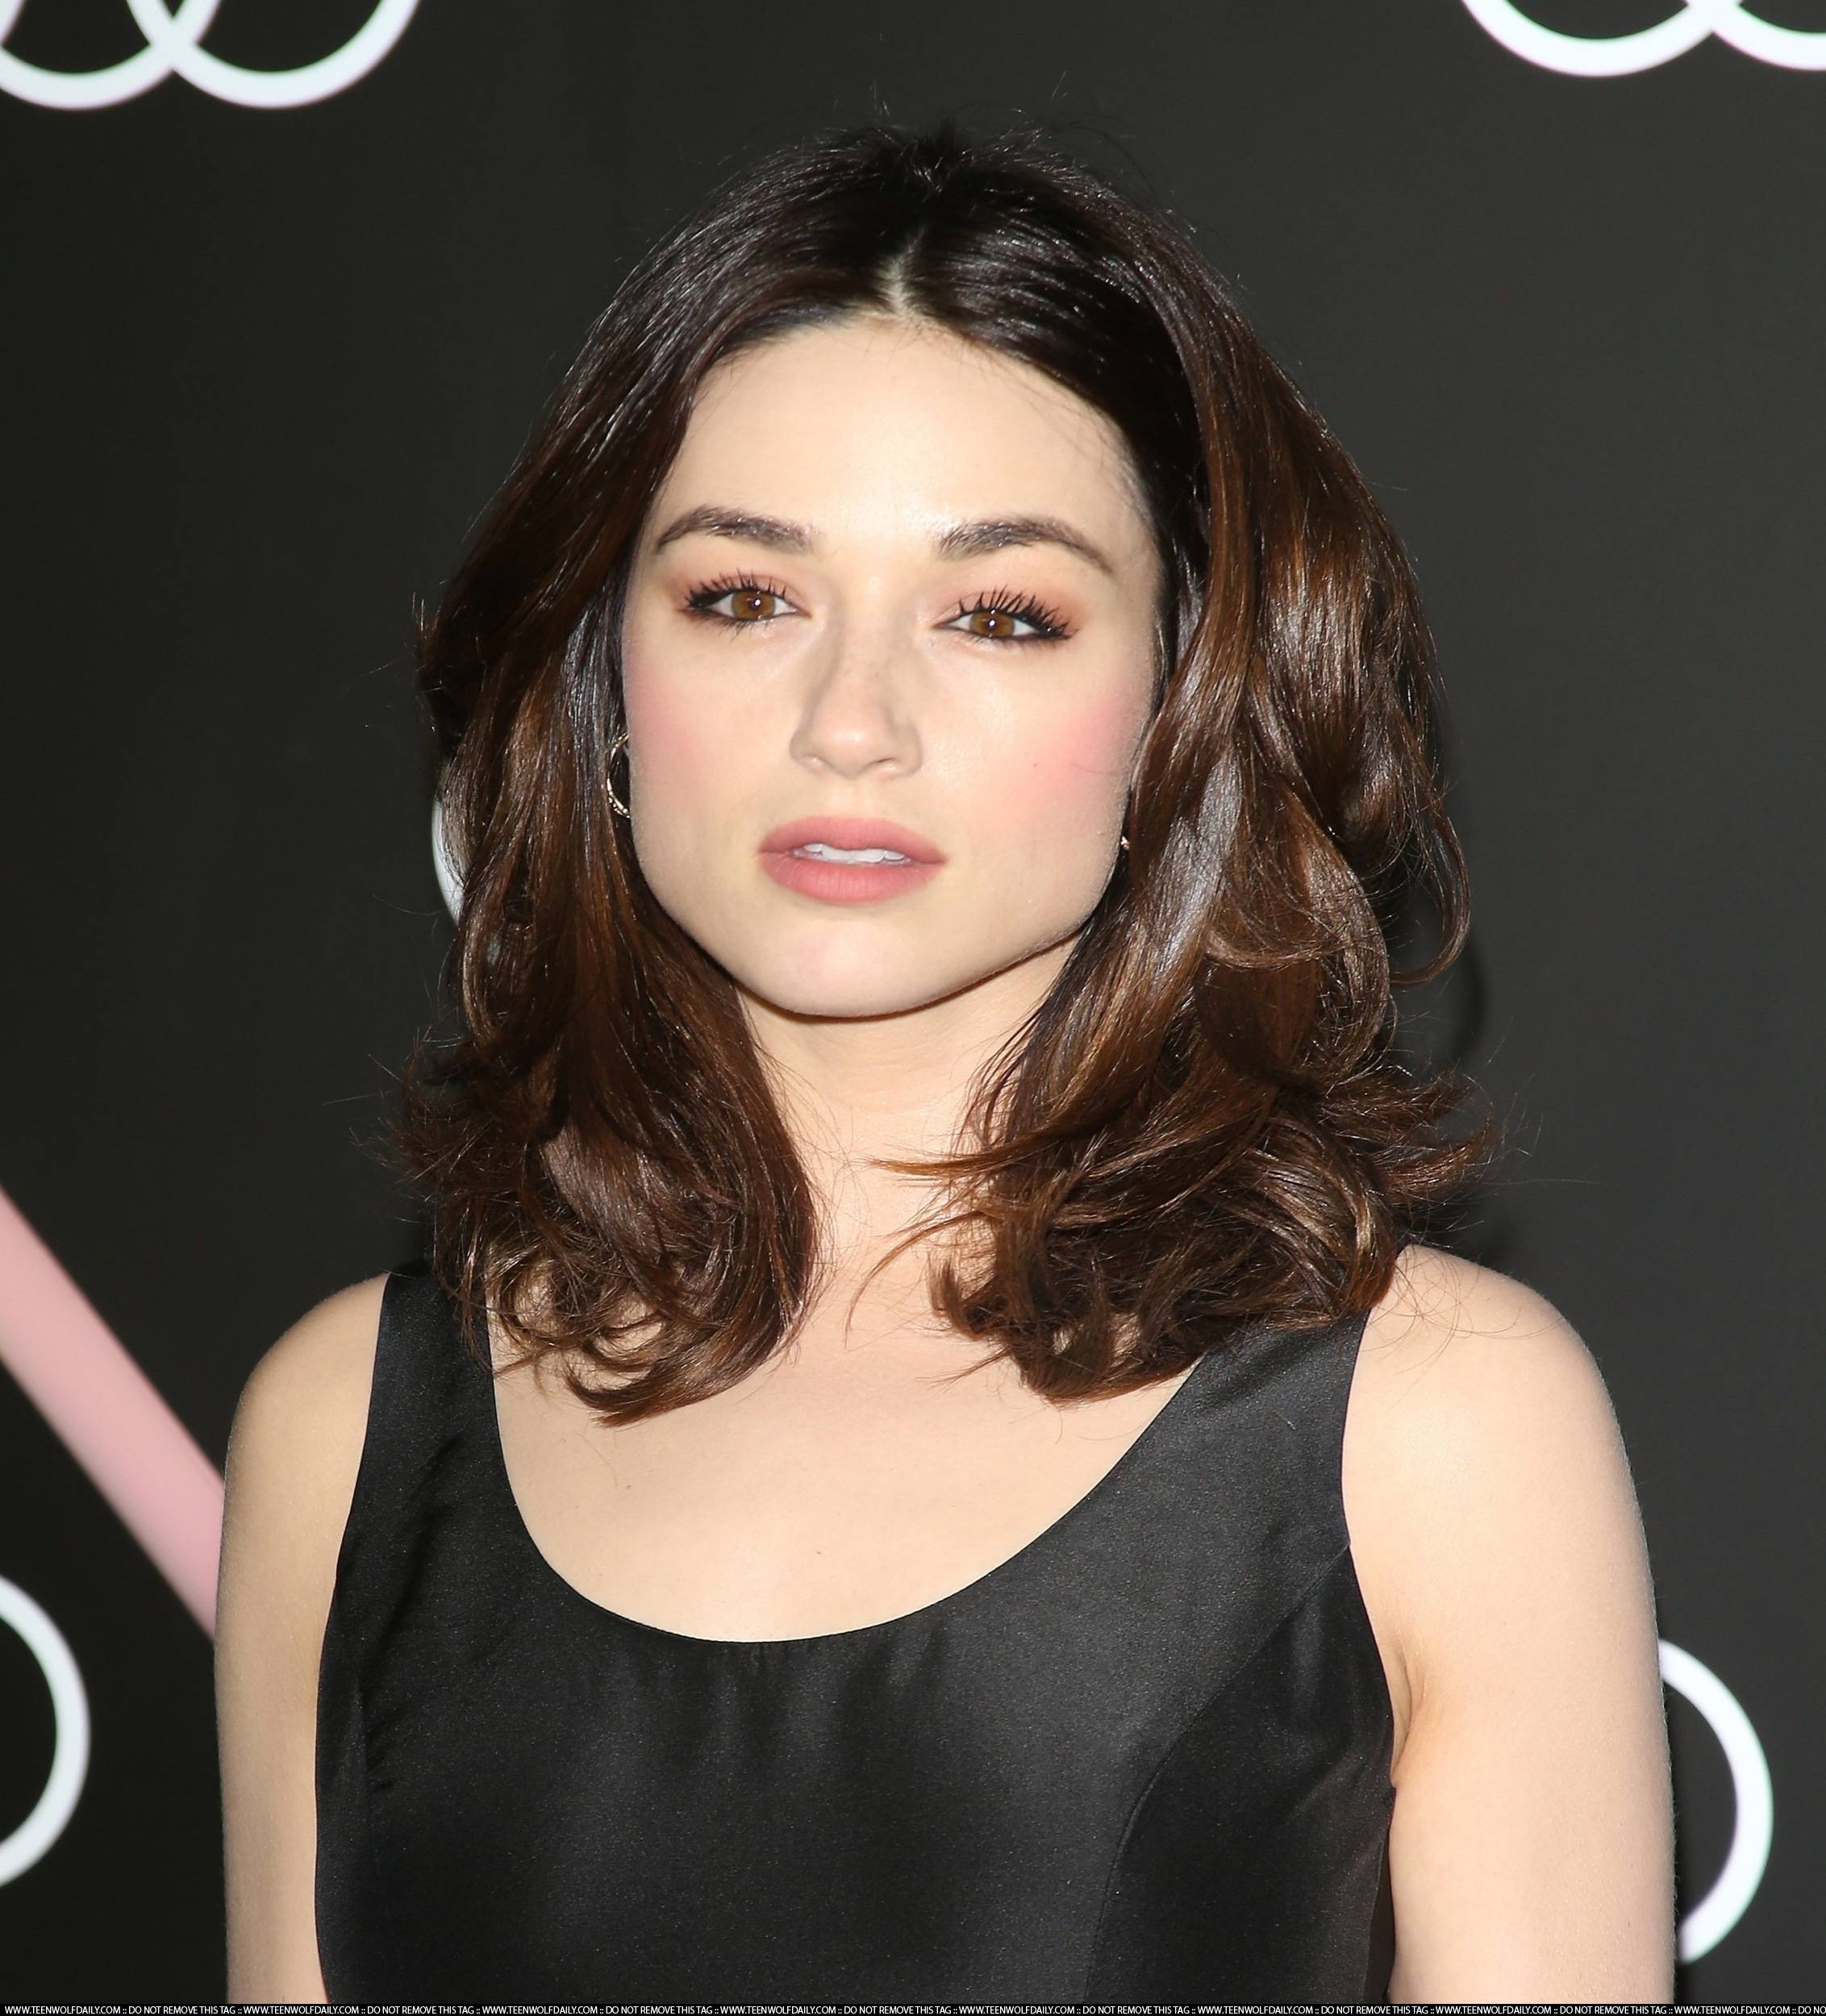 The Hottest Crystal Reed Photos.